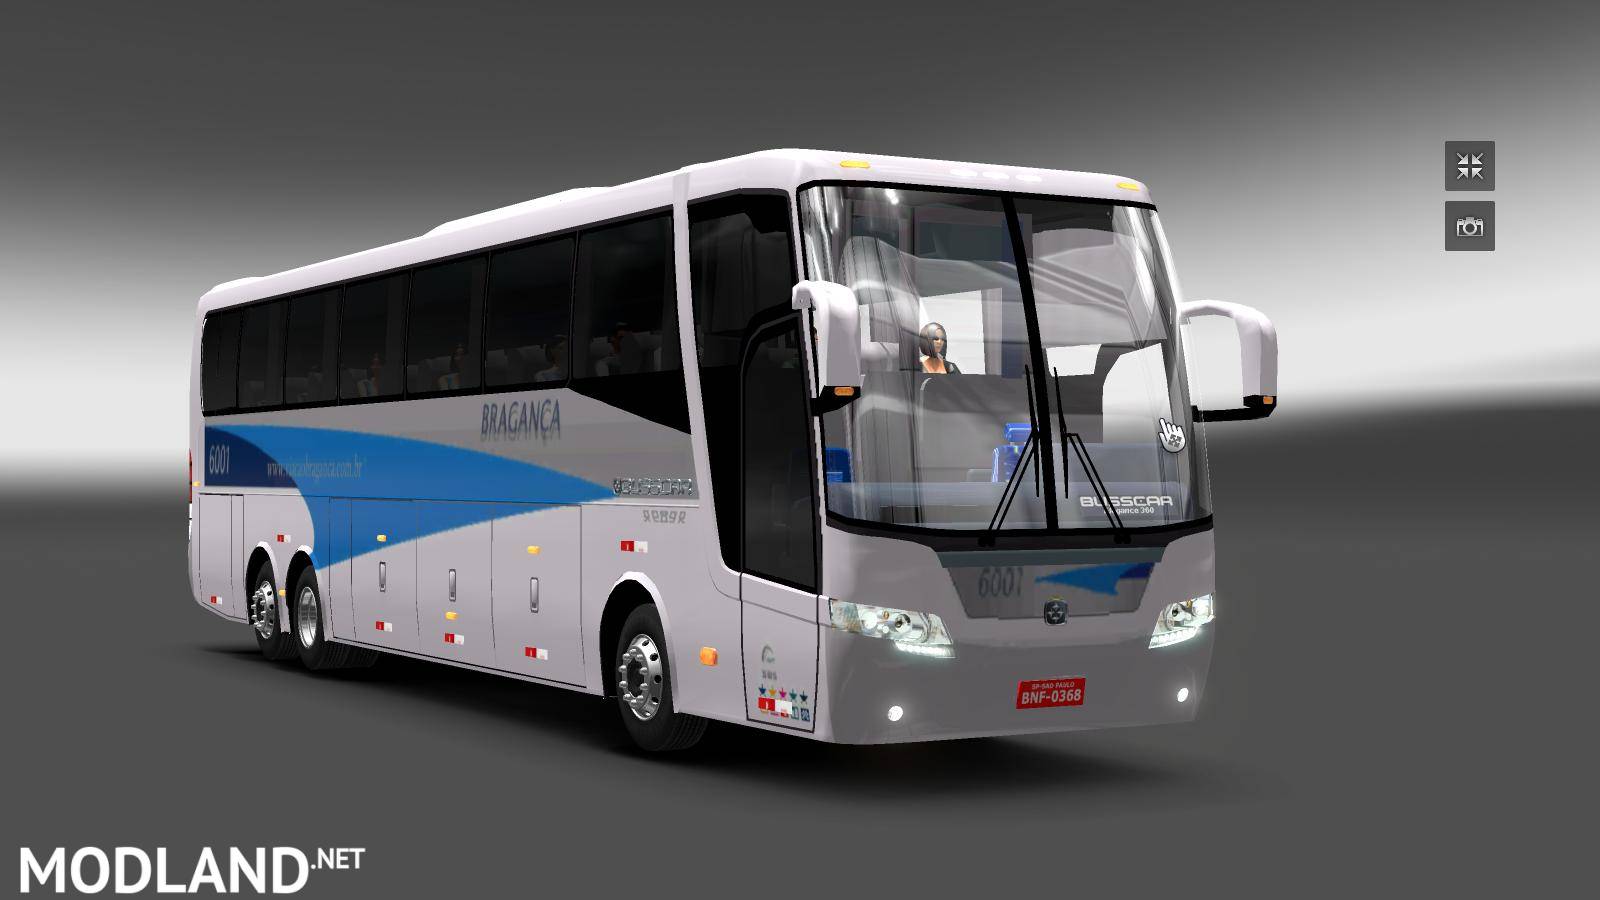 Download Ets2 Bus Mod Indonesia Android Apk